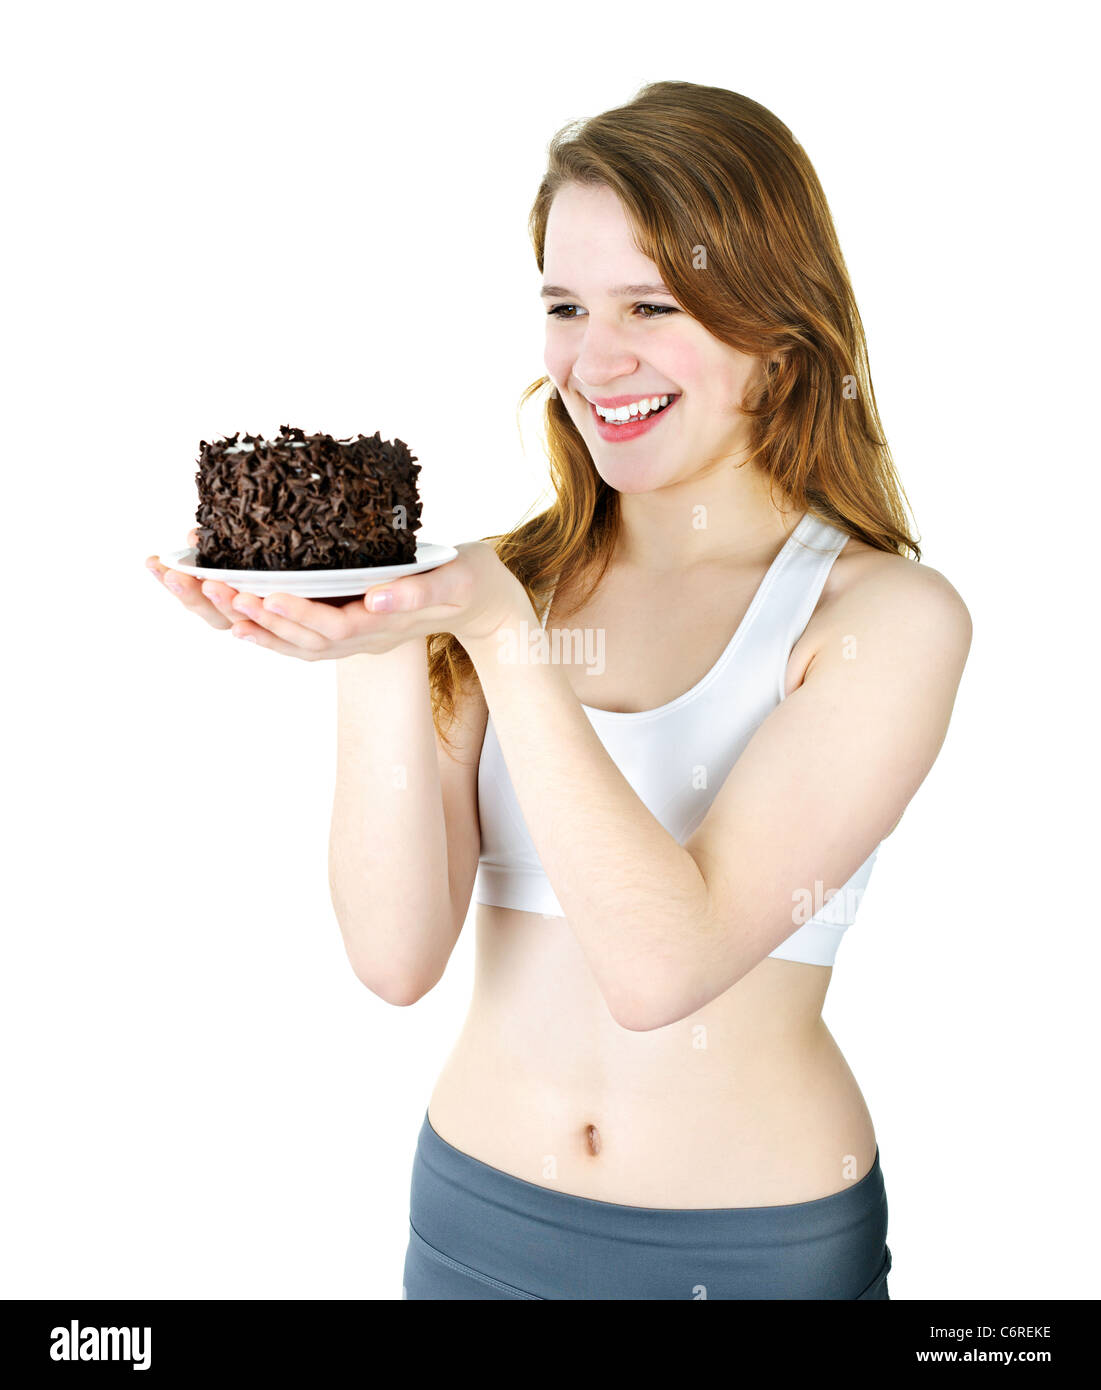 Smiling young woman holding a delicious chocolate cake Stock Photo